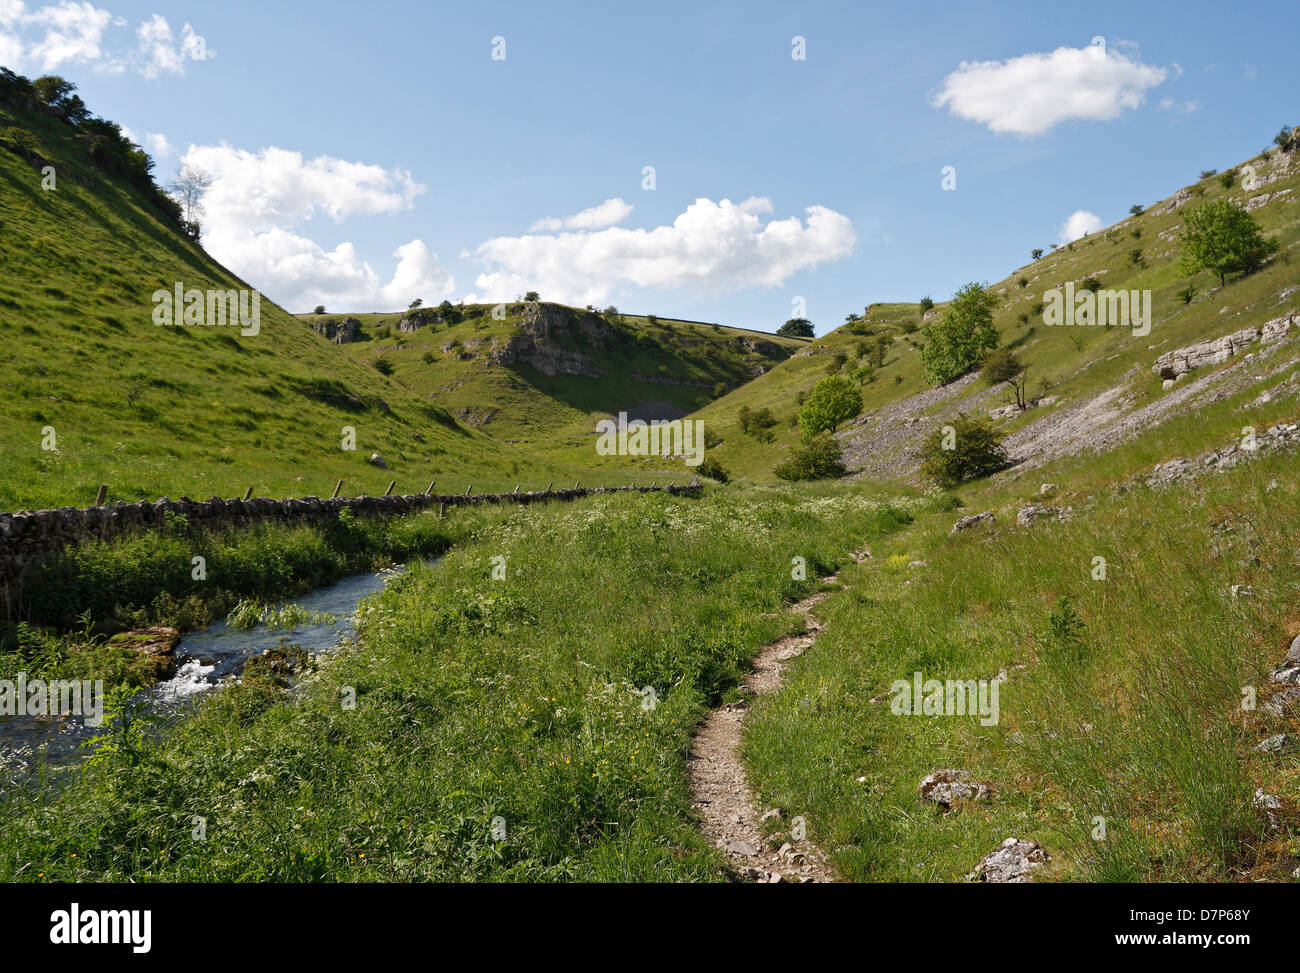 Lathkill Dale in the Derbyshire Peak District National Park England UK, Scenic English landscape British countryside outdoors Stock Photo